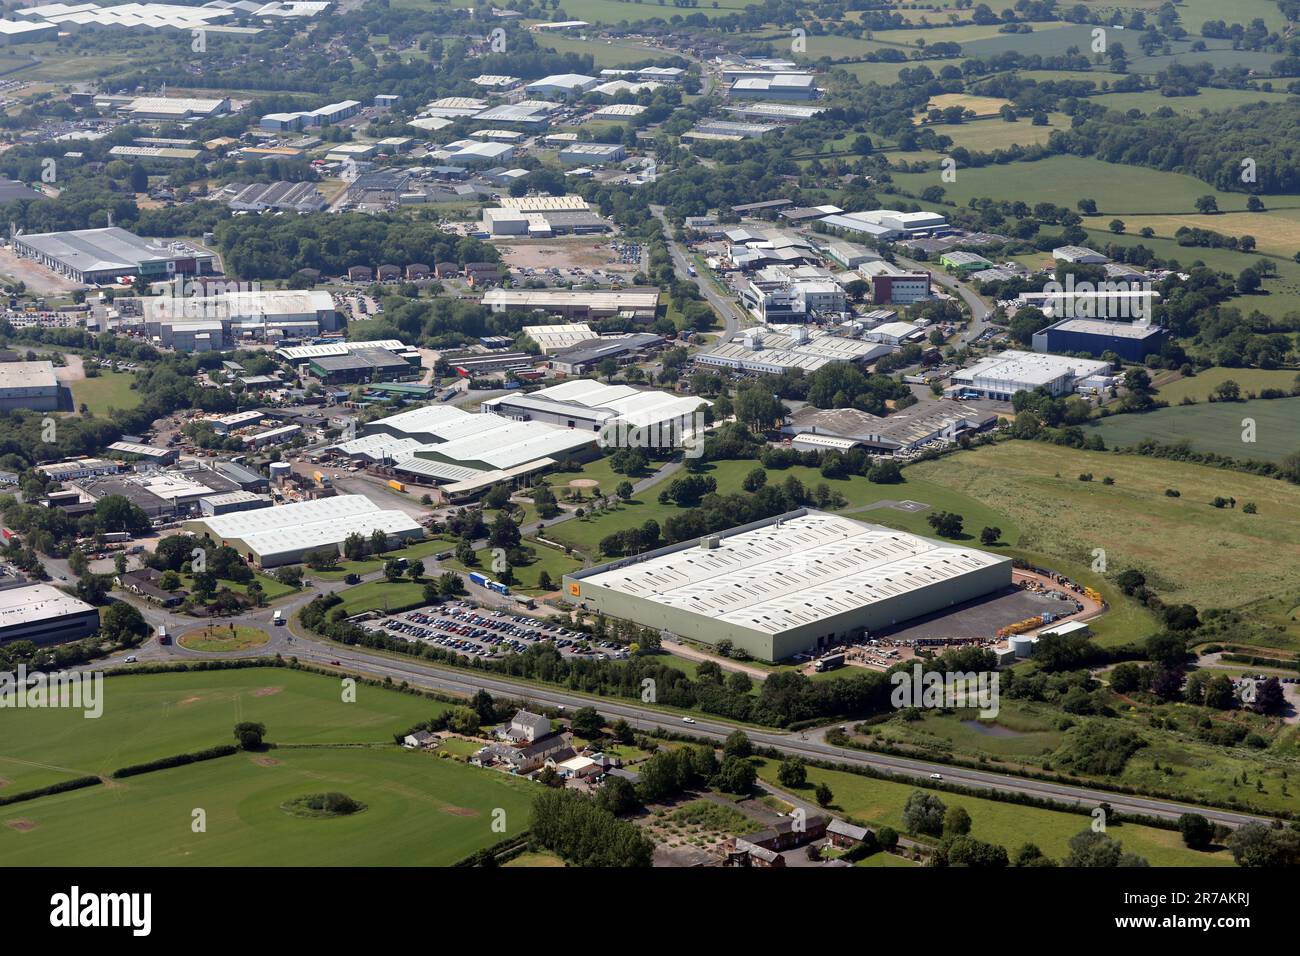 aerial view of part of the very large Wrexham Industrial Estate situated at Holt to the east of Wrexham, North Wales Stock Photo